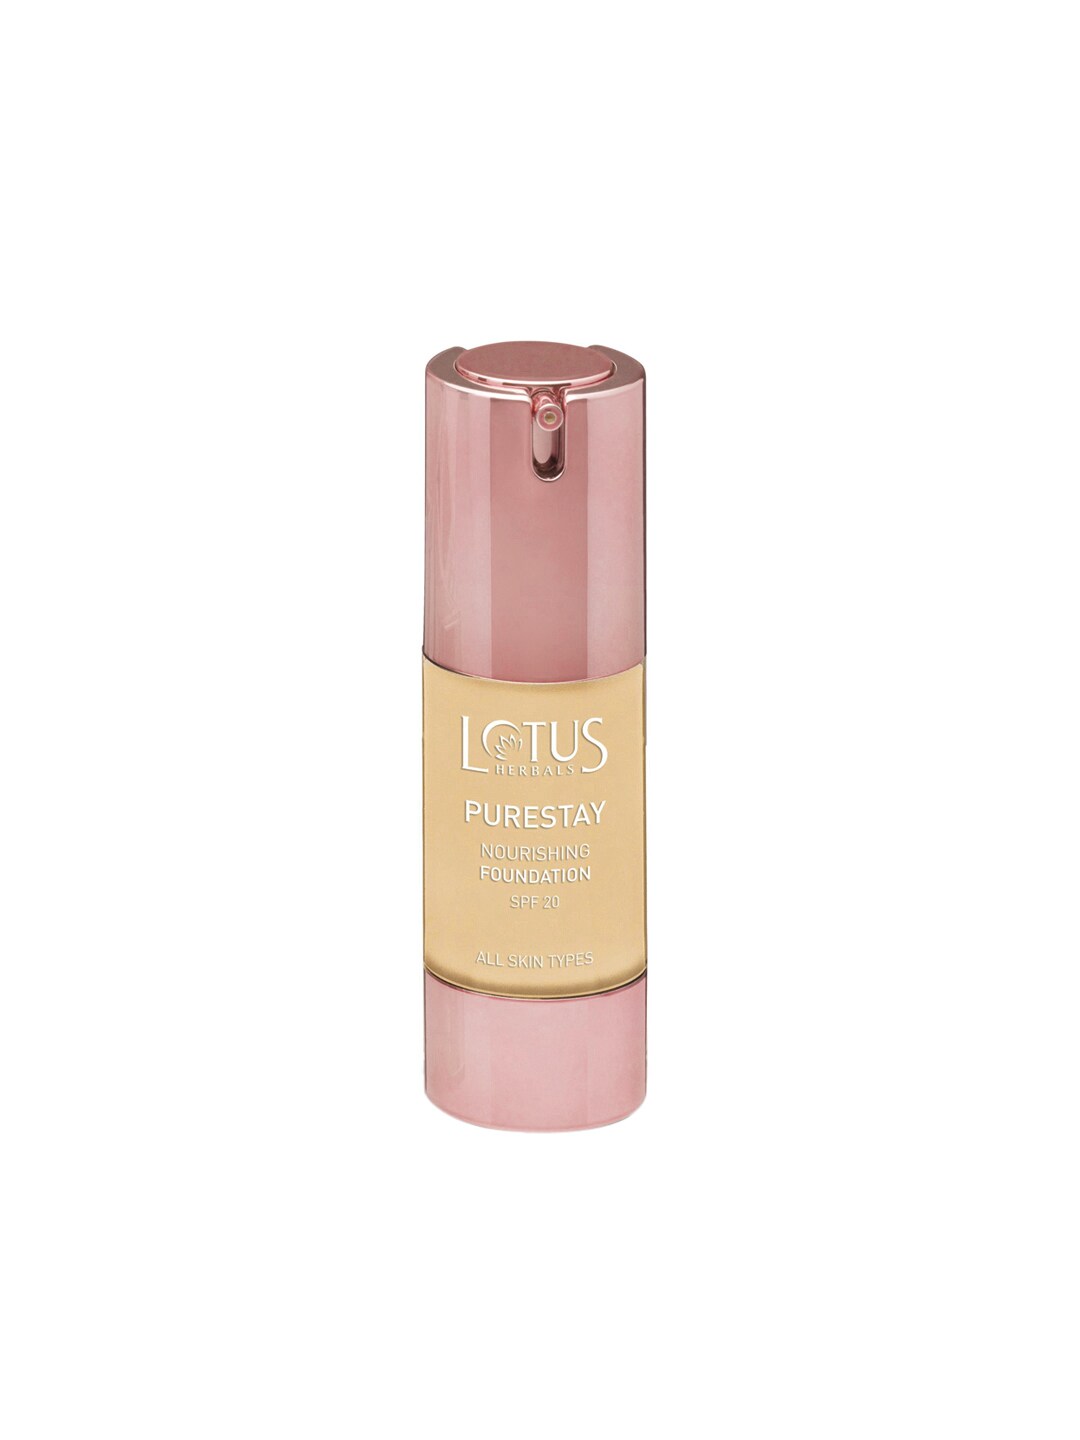 Lotus Herbals Sustainable Purestay Nourishing Foundation with SPF 20 - Hazelnut Star 30ml Price in India